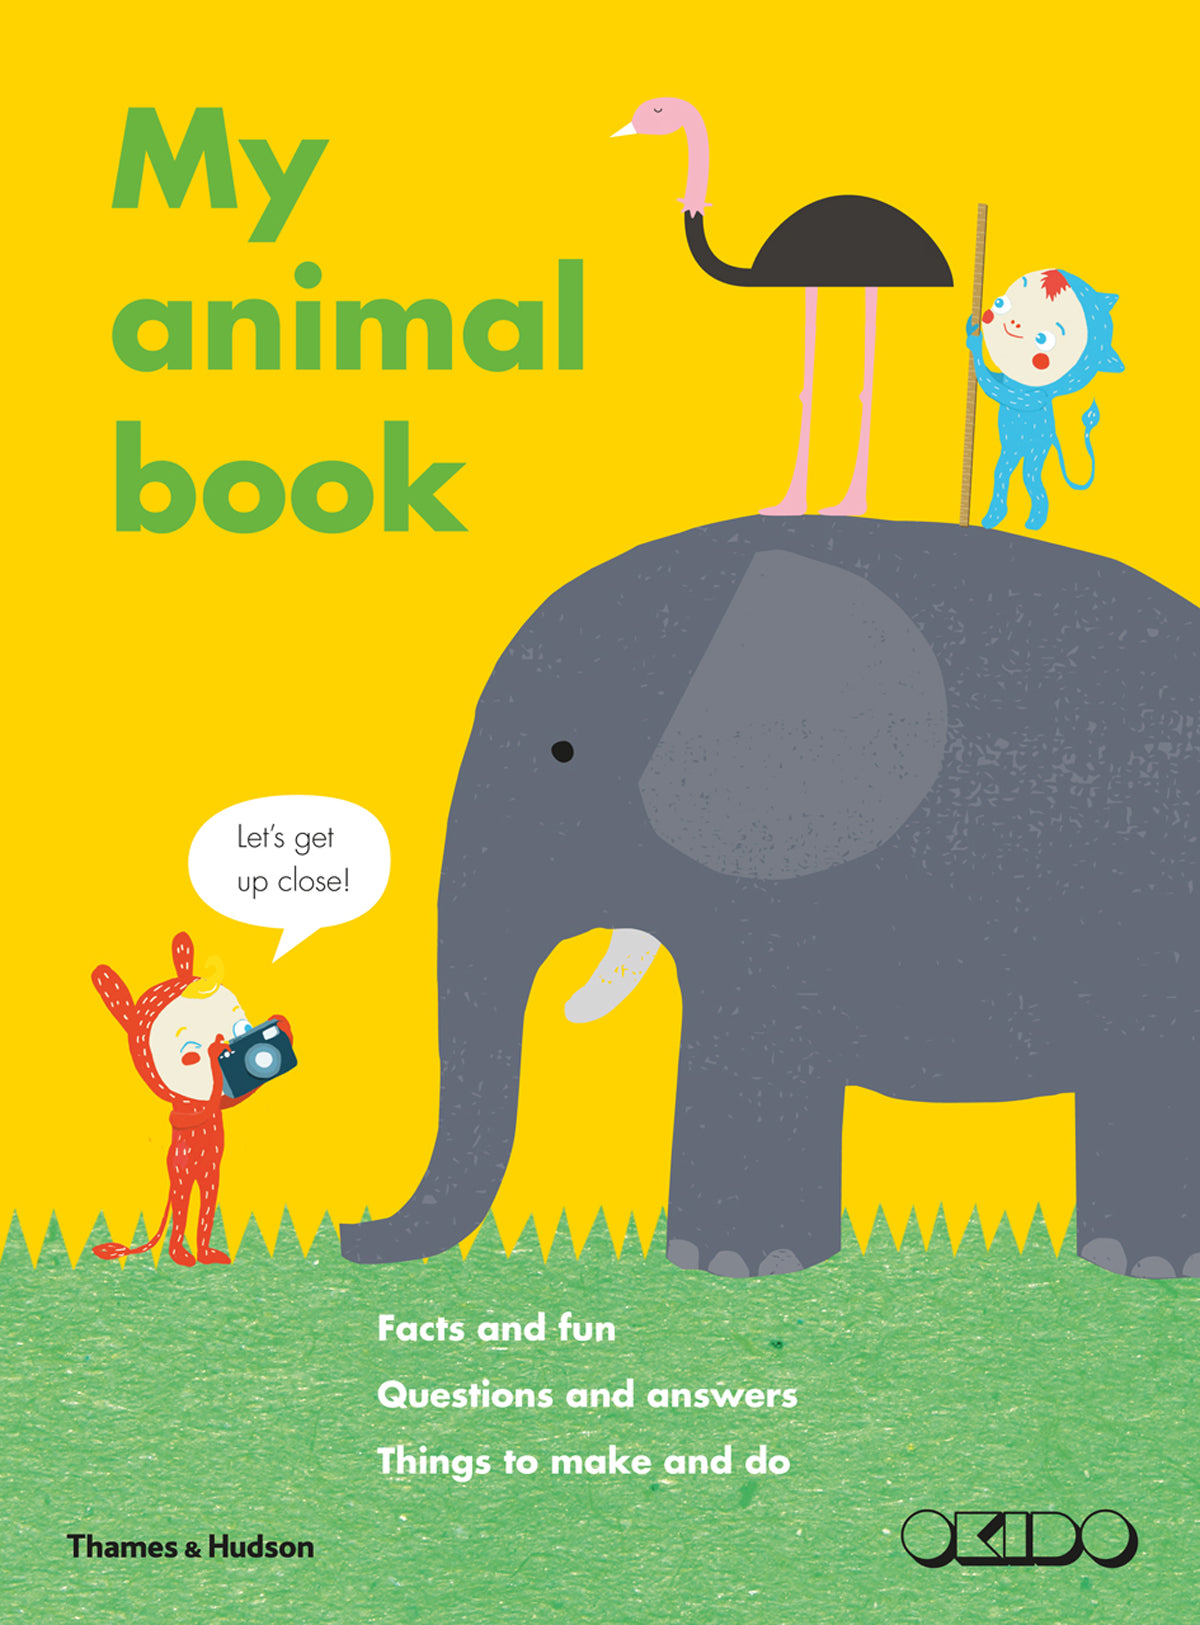 View All About Animals For Kids Images